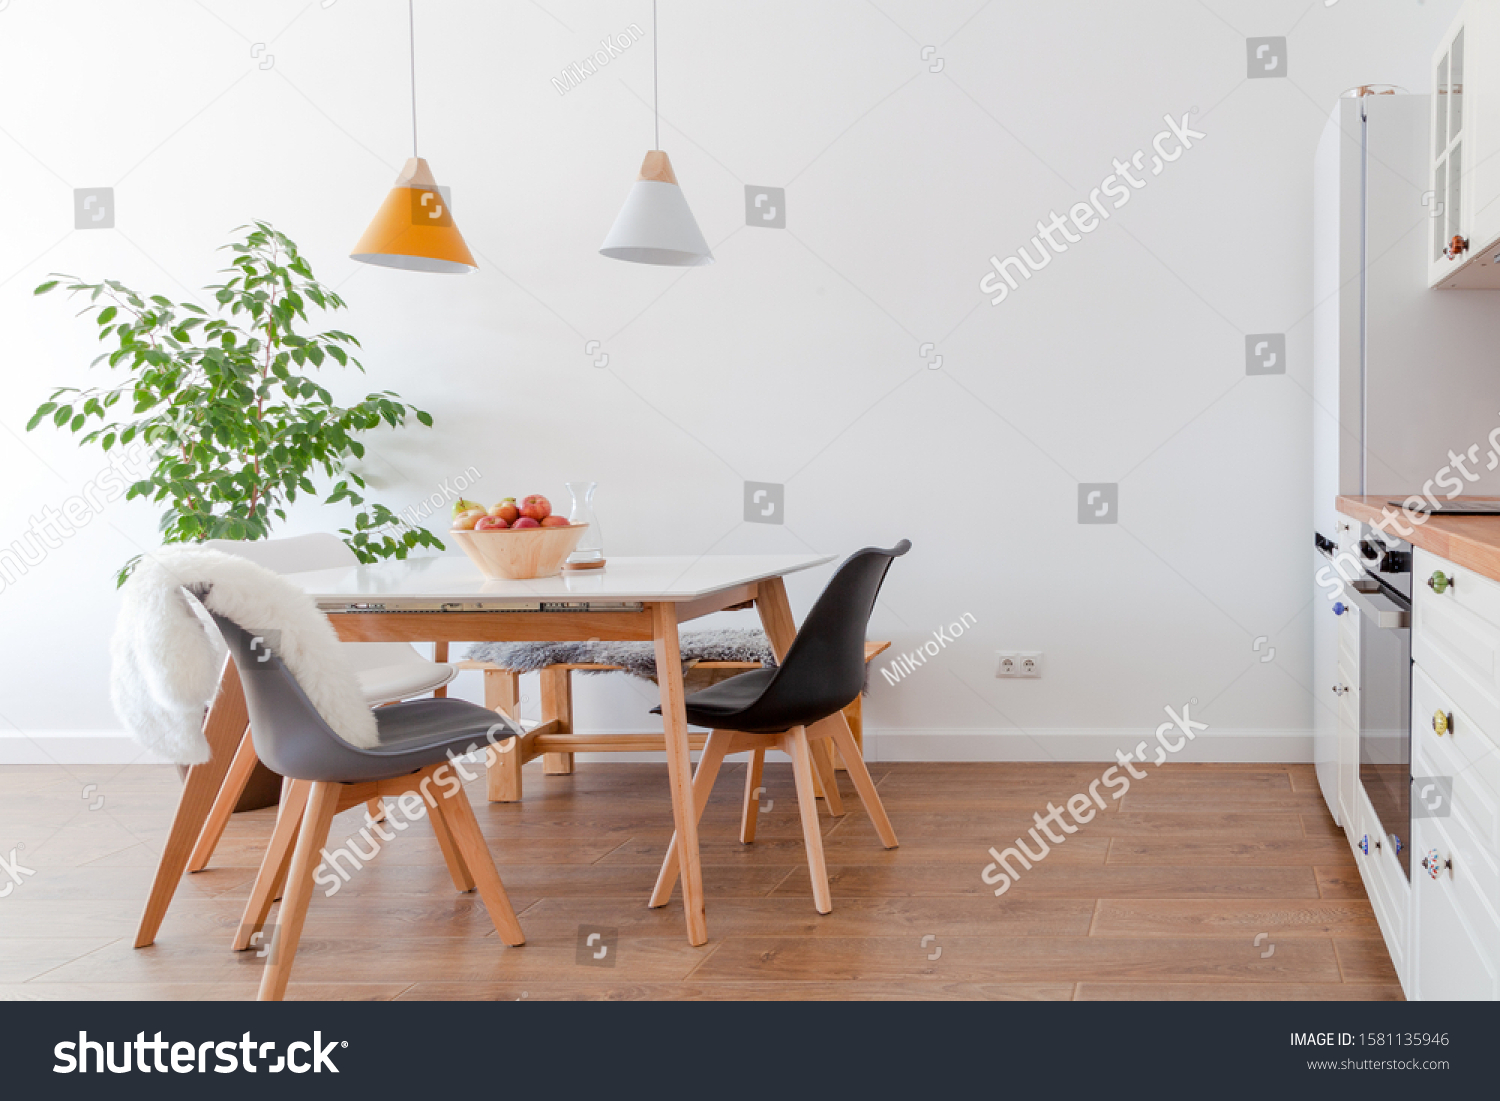 Modern interior of cozy kitchen, dining room, white furniture, lamps above wooden table, chairs, apples, bowl. Concept decor, design, advert, credit, mortgage, home for young family, magazine cover #1581135946